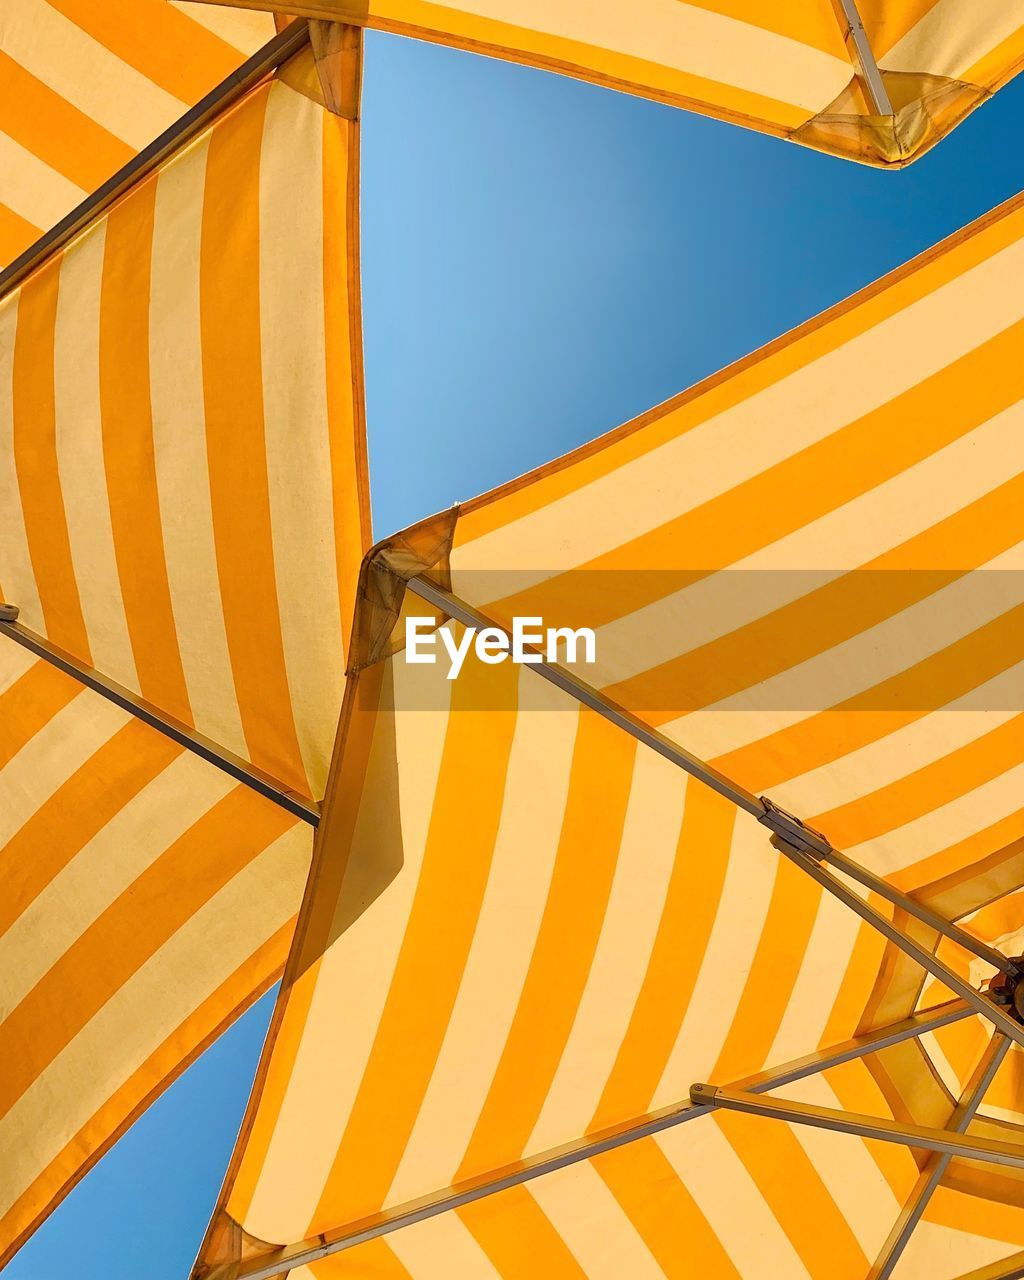 Low angle view of yellow parasol against clear sky